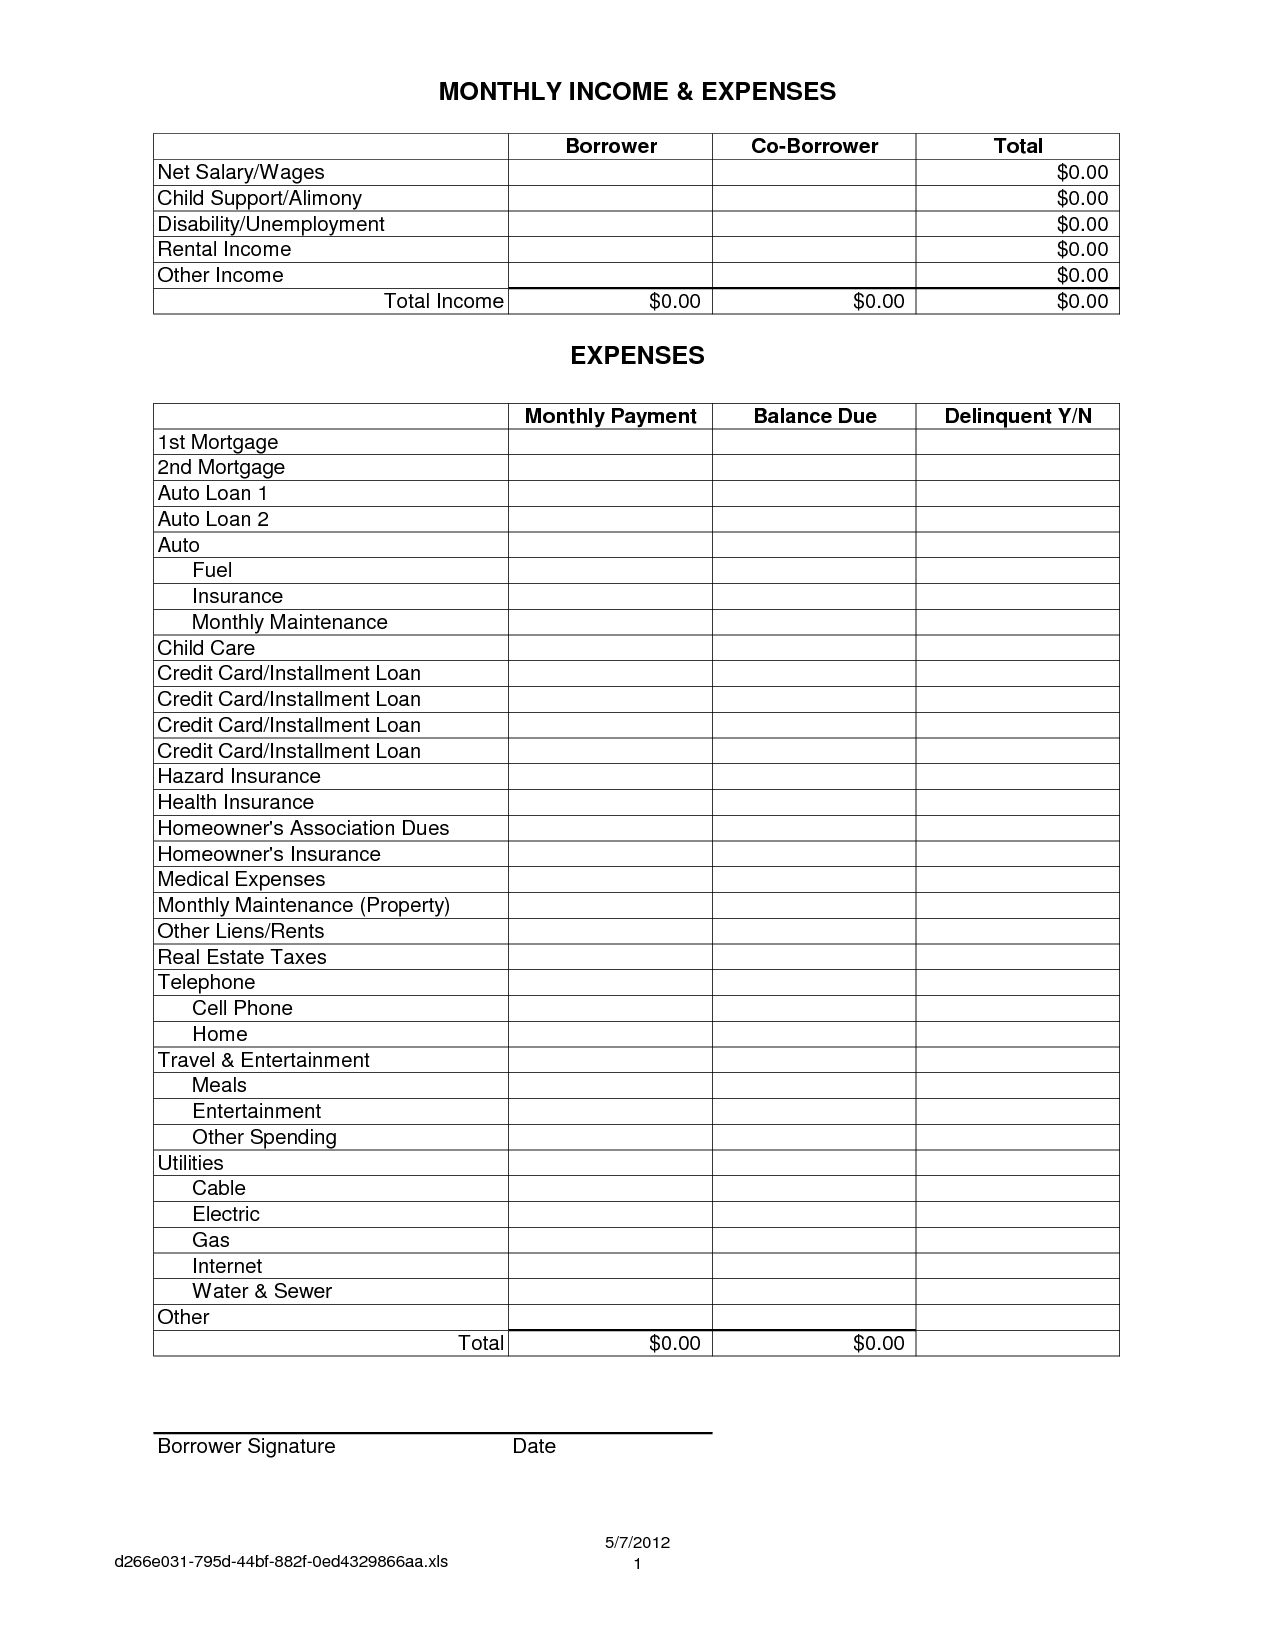 Spreadsheet For Monthly Income And Expenses For Monthly Business Income And Expense Worksheet  Homebiz4U2Profit